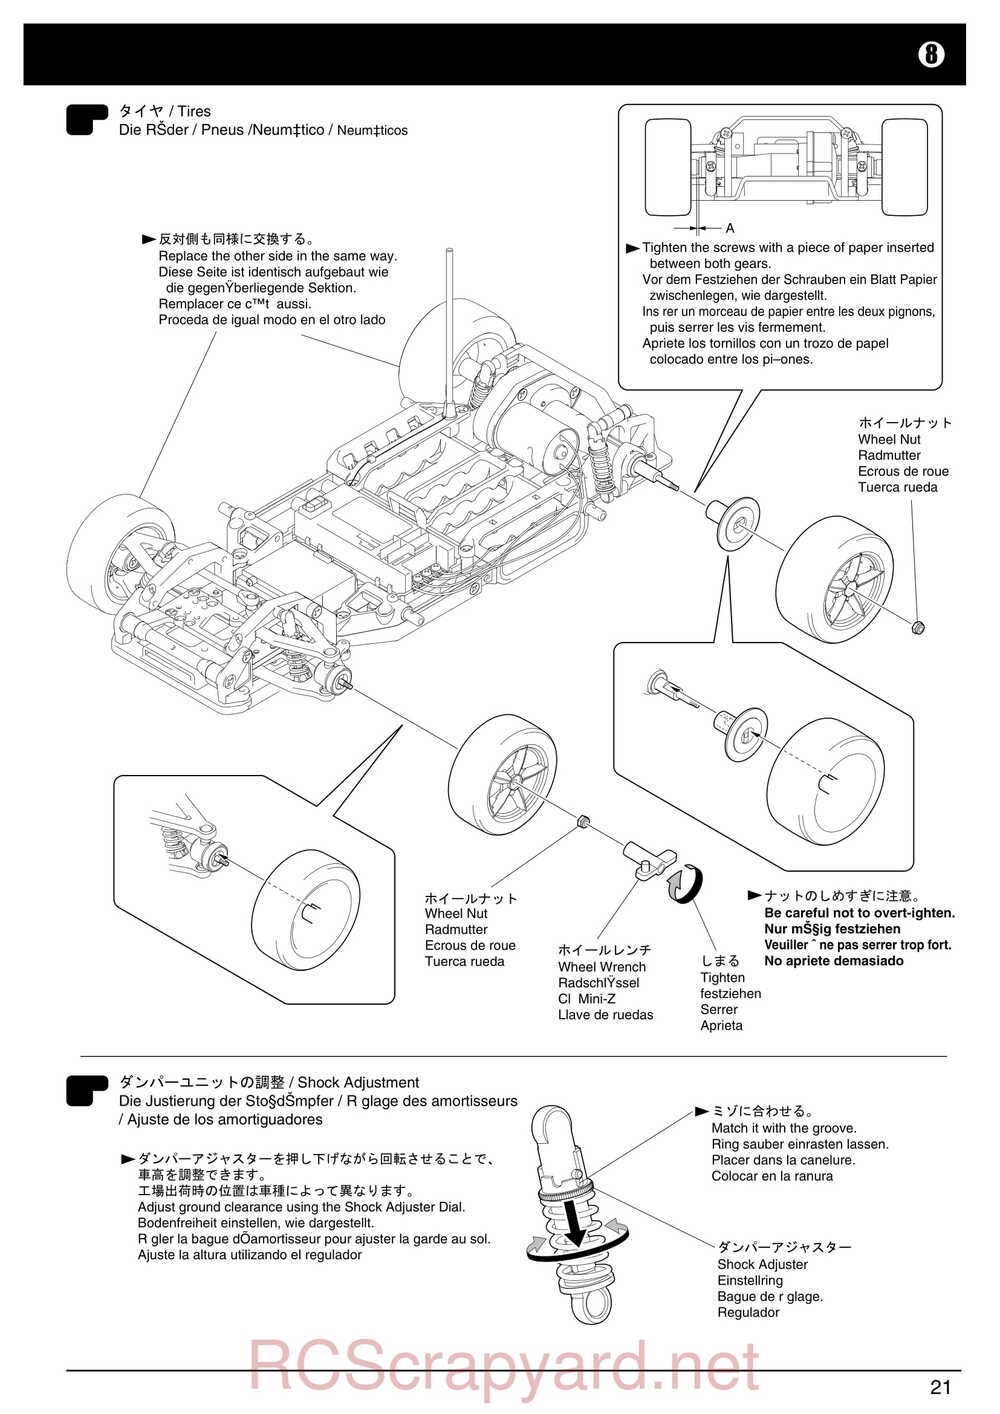 Kyosho - 30551 - a12 Sport - Manual - Page 21